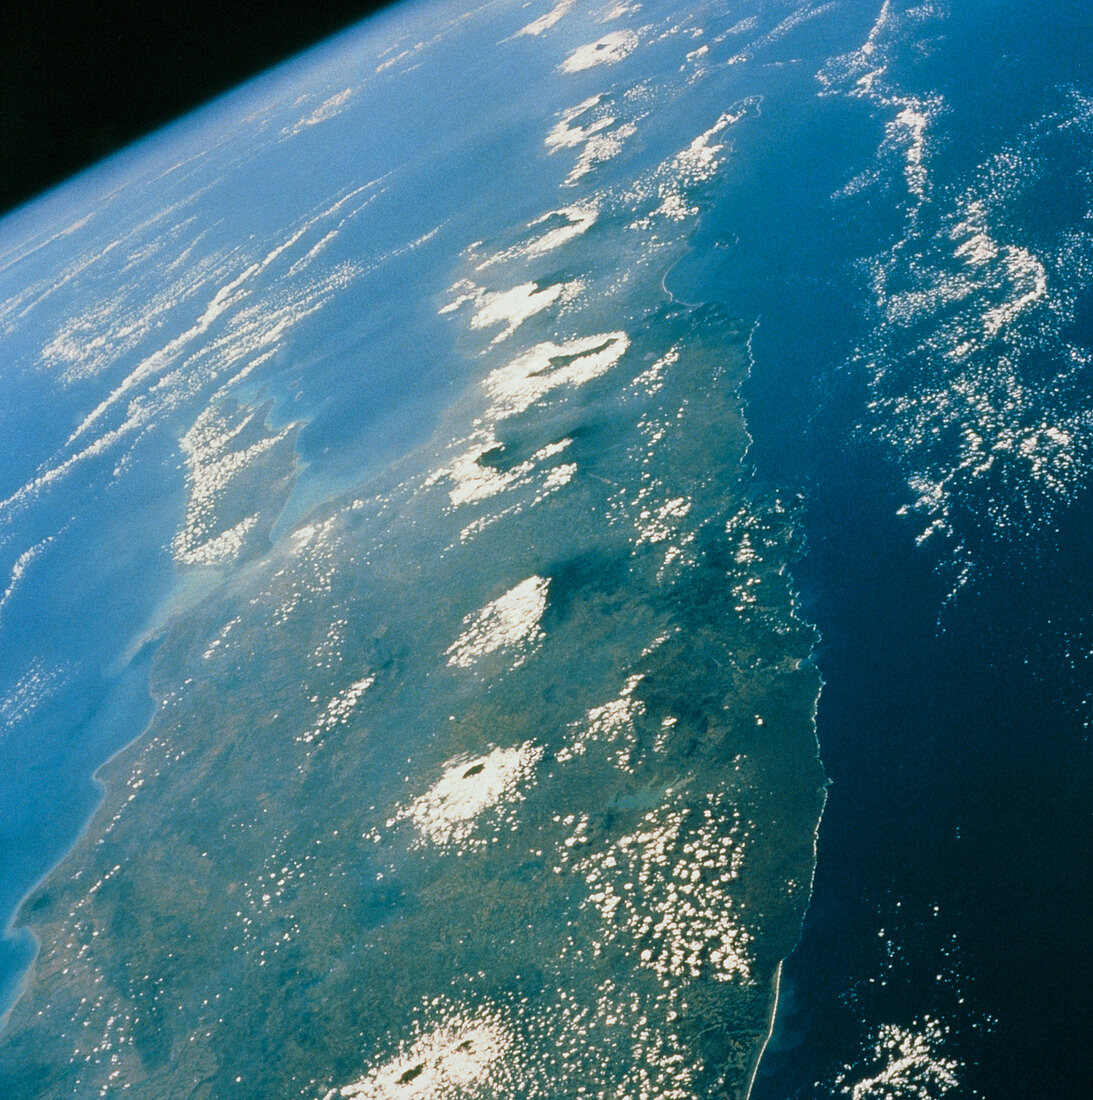 Volcanic chain in Java,seen from STS-46